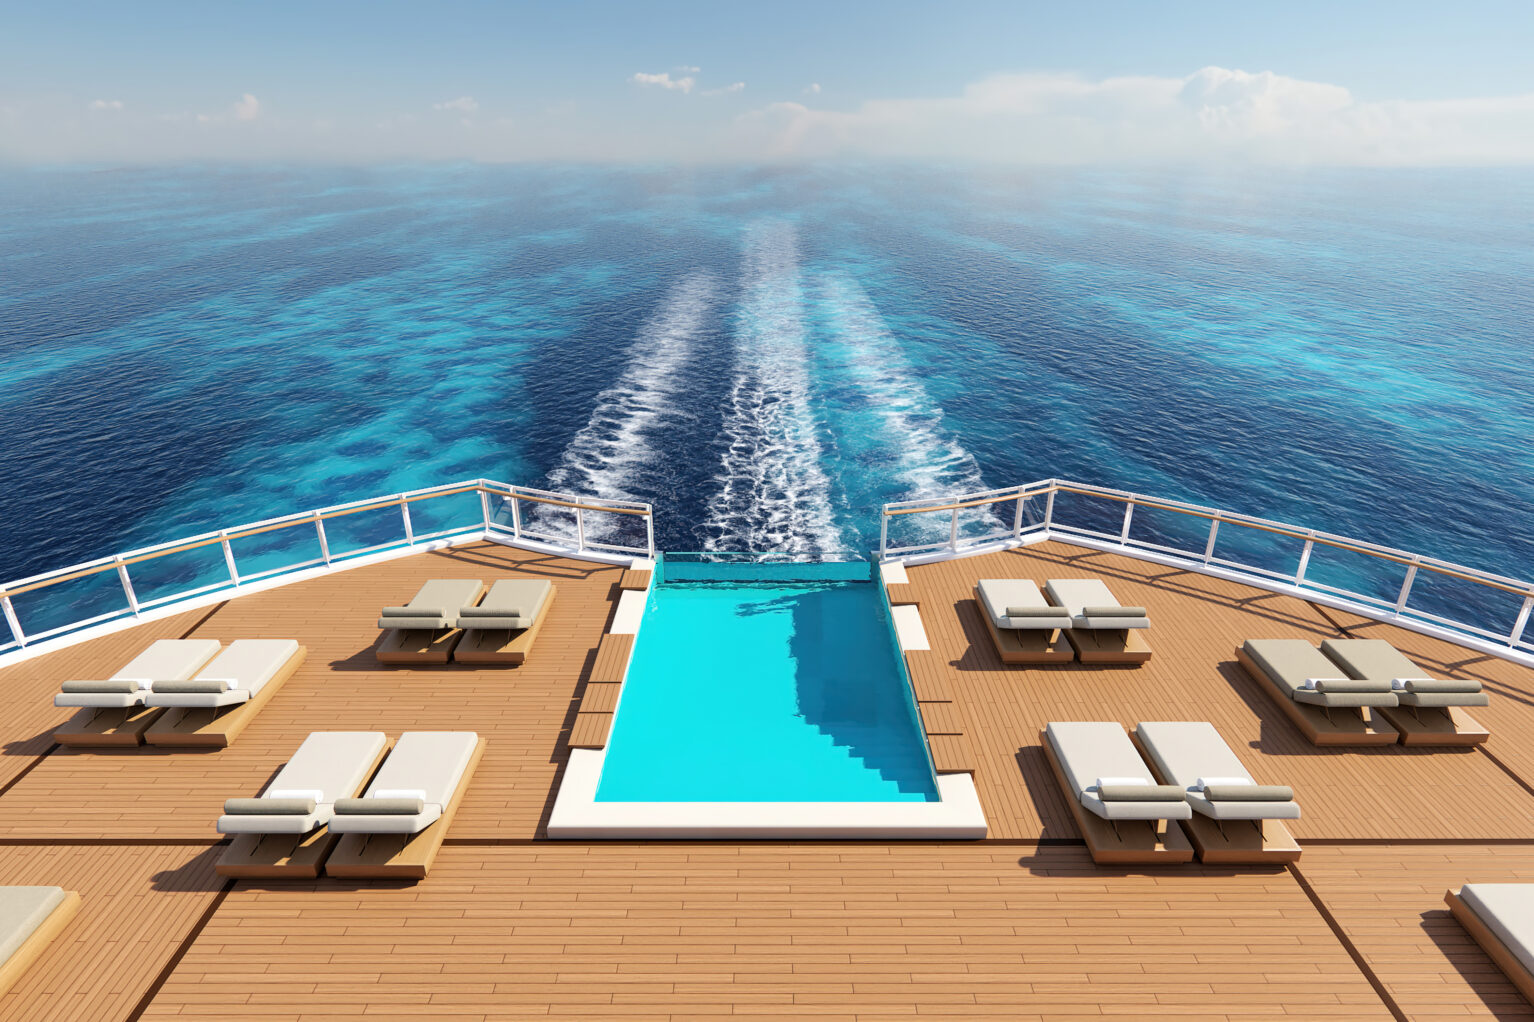 The idyllic Infinity Pool at The Haven is one of the amenities that await guests in cruise line's premium ships. 